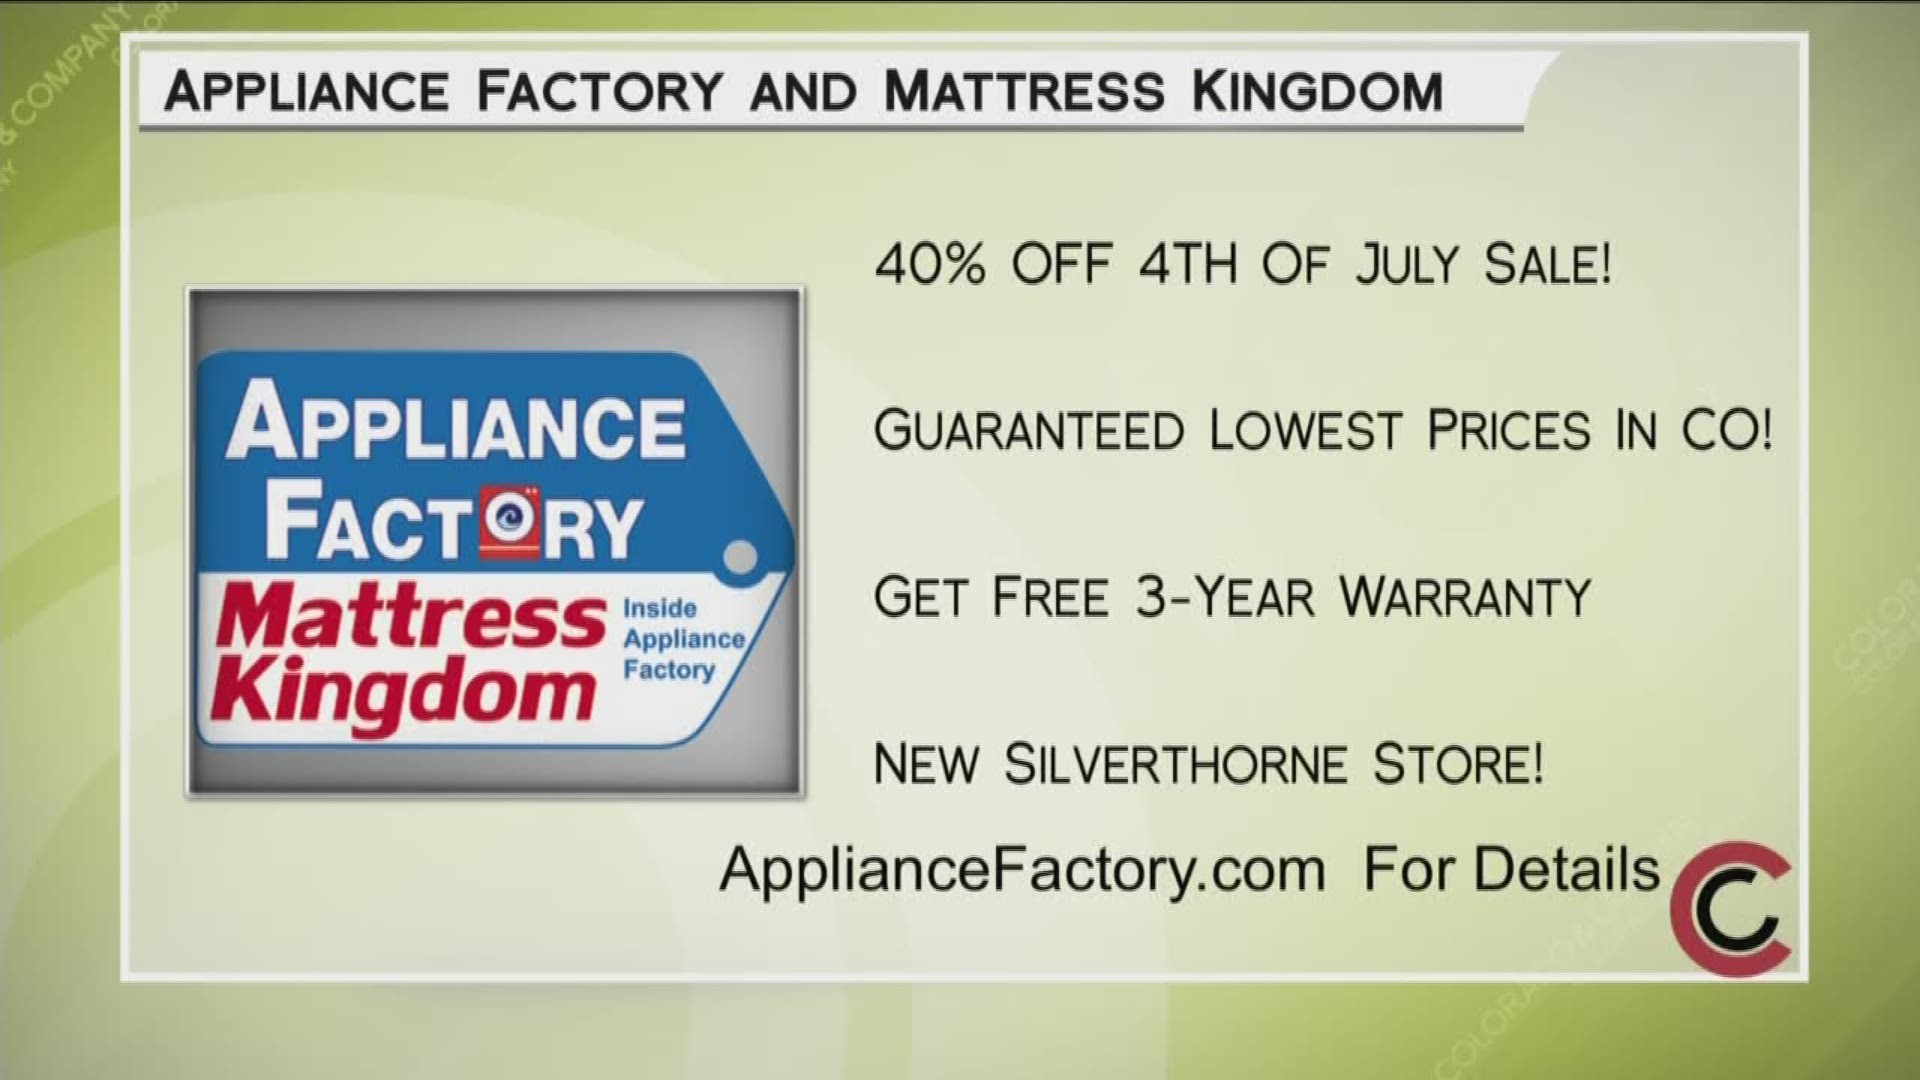 Appliance Factory and Mattress Kingdom’s July 4th, 40% Off Sale is happening now! They have the lowest prices in Colorado and guarantee they’ll beat the big box stores’ 4th of July Sales. Shop in store and browse online now at www.ApplianceFactory.com. Mention Colorado and Company and get a 3 year major component warranty on your purchase. 
THIS INTERVIEW HAS COMMERCIAL CONTENT. PRODUCTS AND SERVICES FEATURED APPEAR AS PAID ADVERTISING.